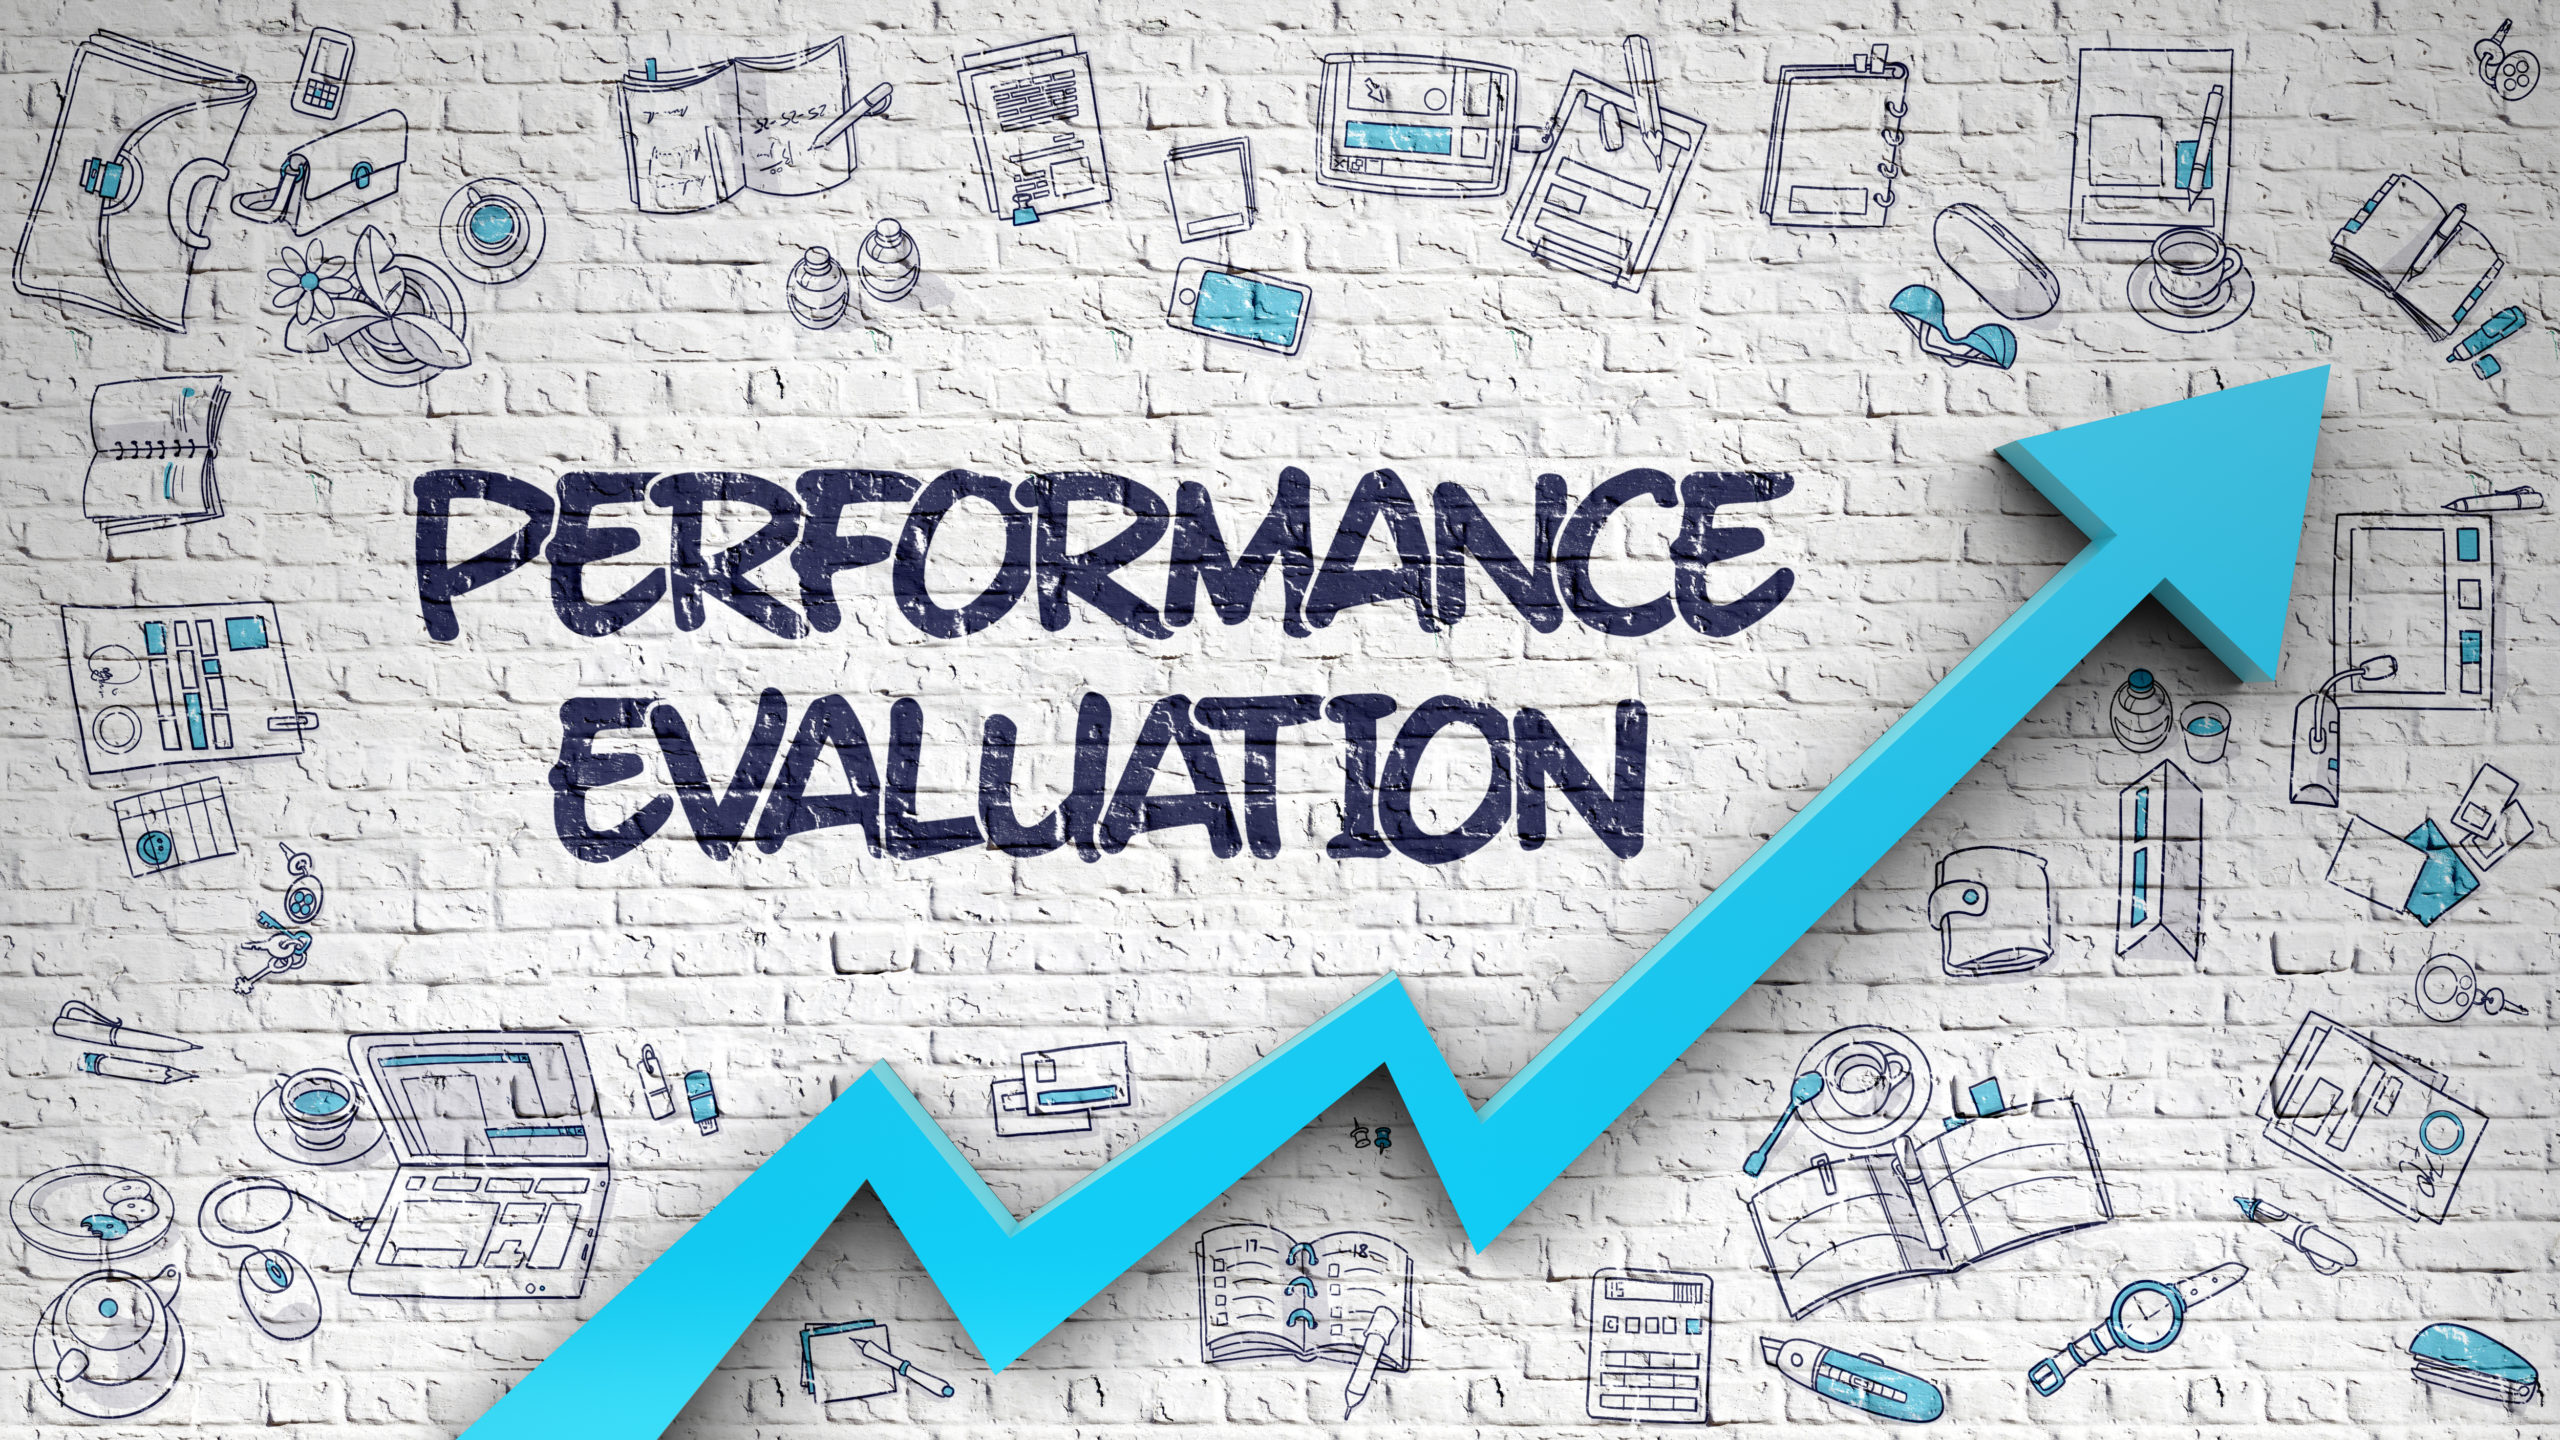 5 Tips To Get The Most Out Of Your Performance Evaluations